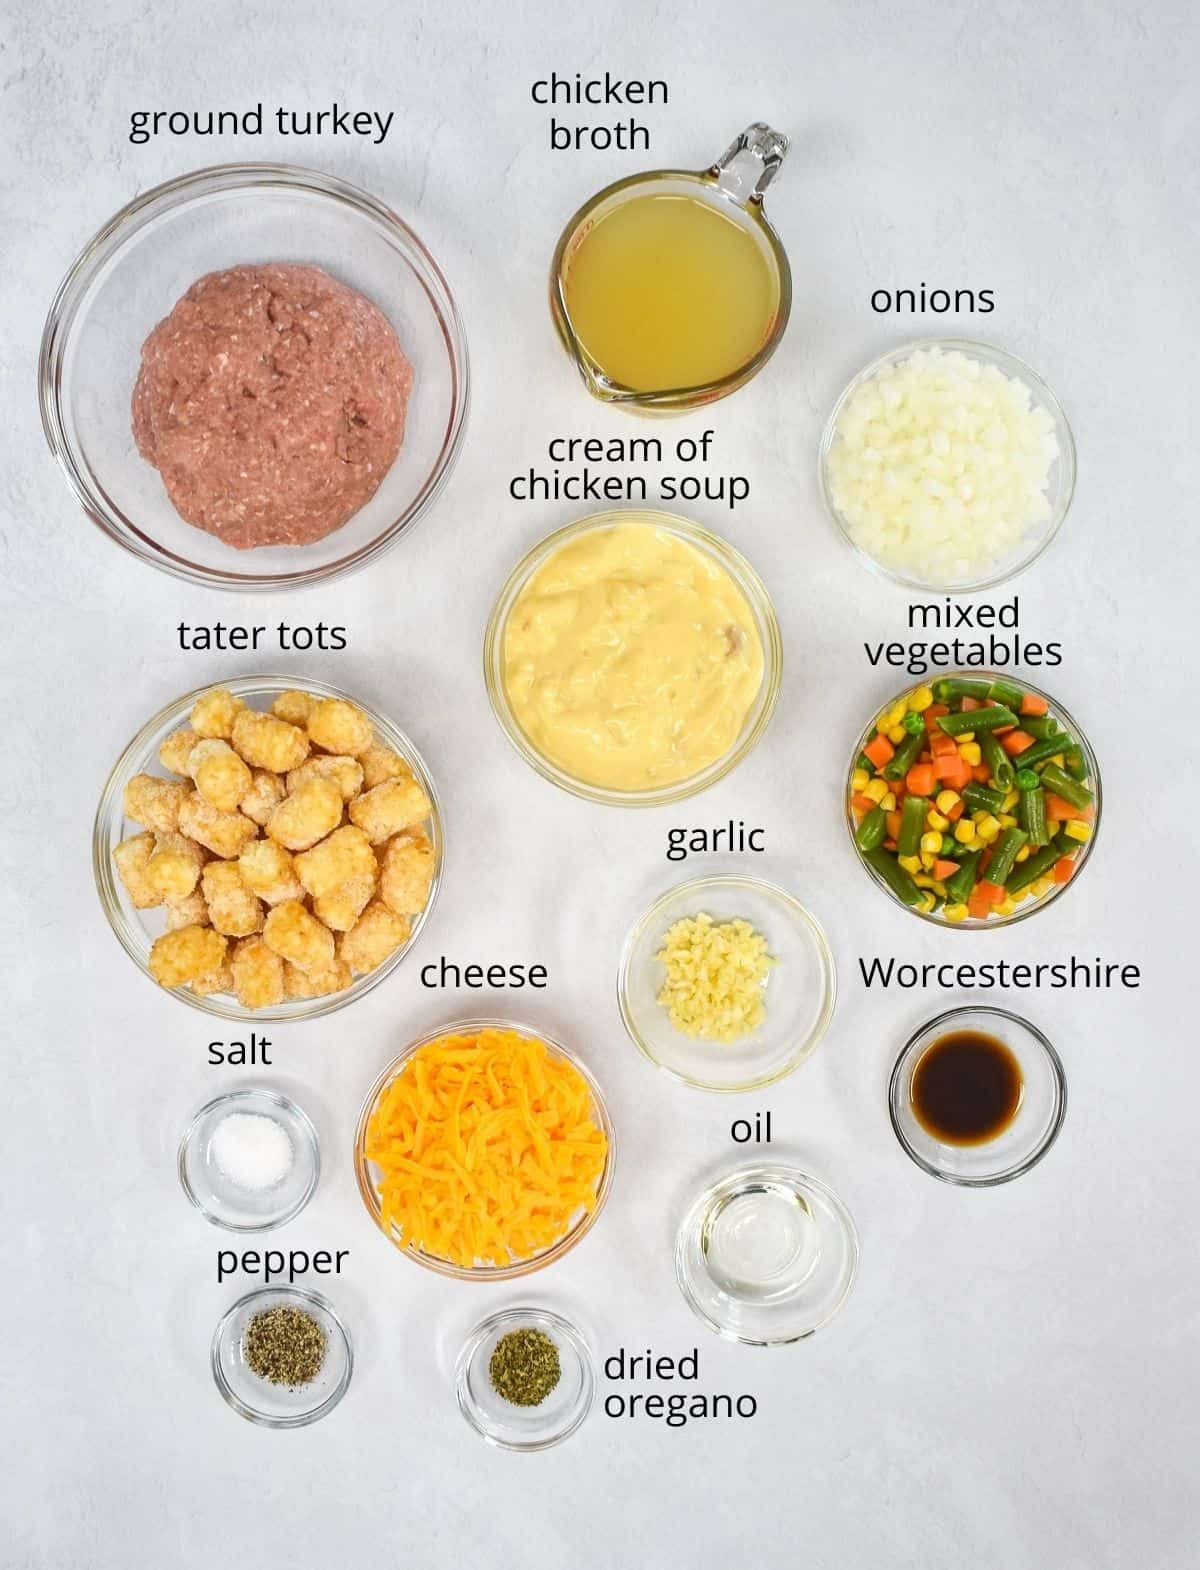 The ingredients for the tater tot casserole prepped and arranged in glass bowls and set on a white table. Each ingredient has a label with the name above it in small black letters.